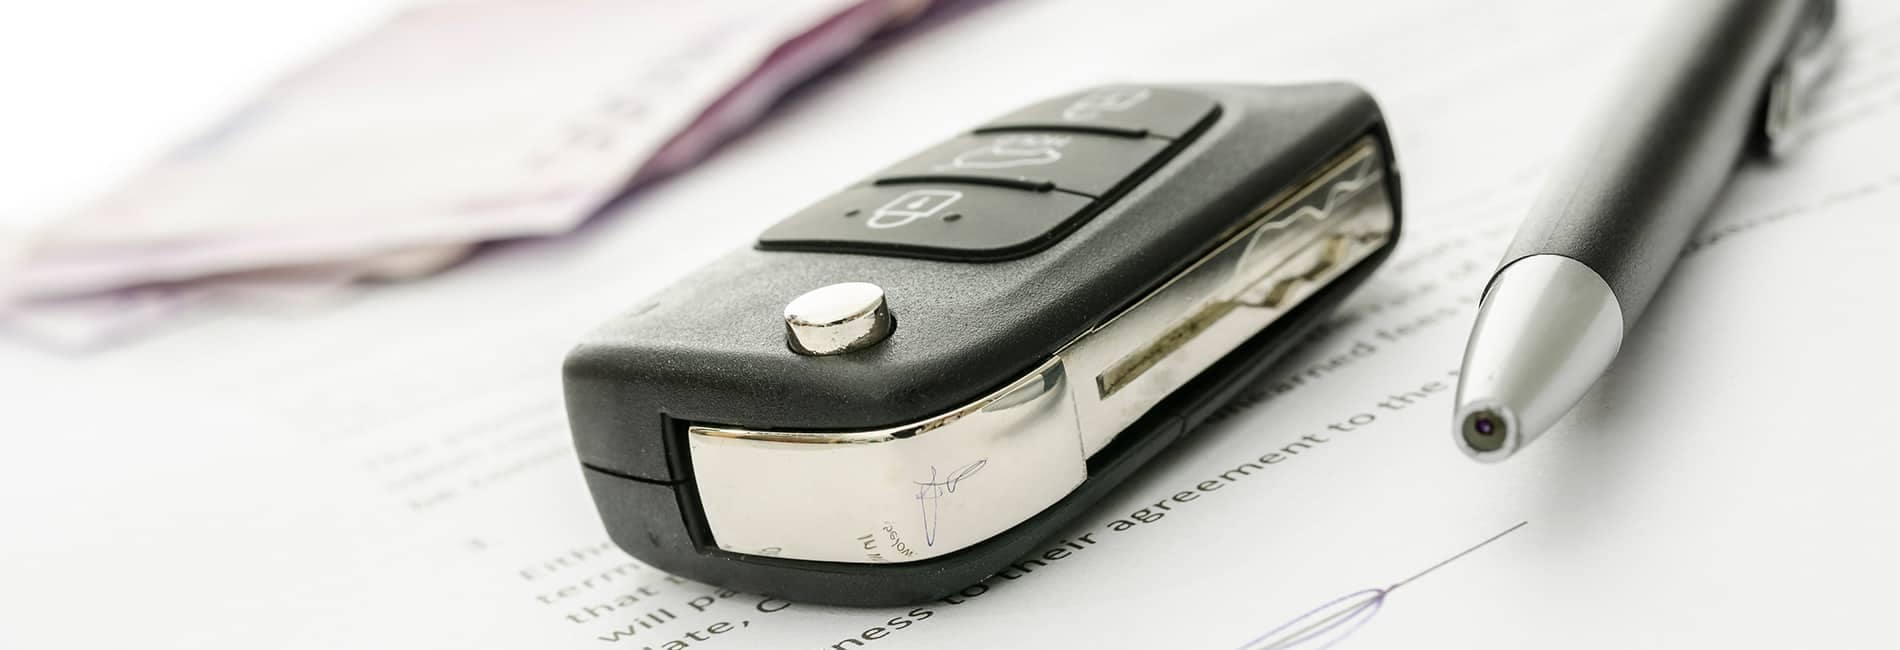 Key fob and pen on top of a finance agreement